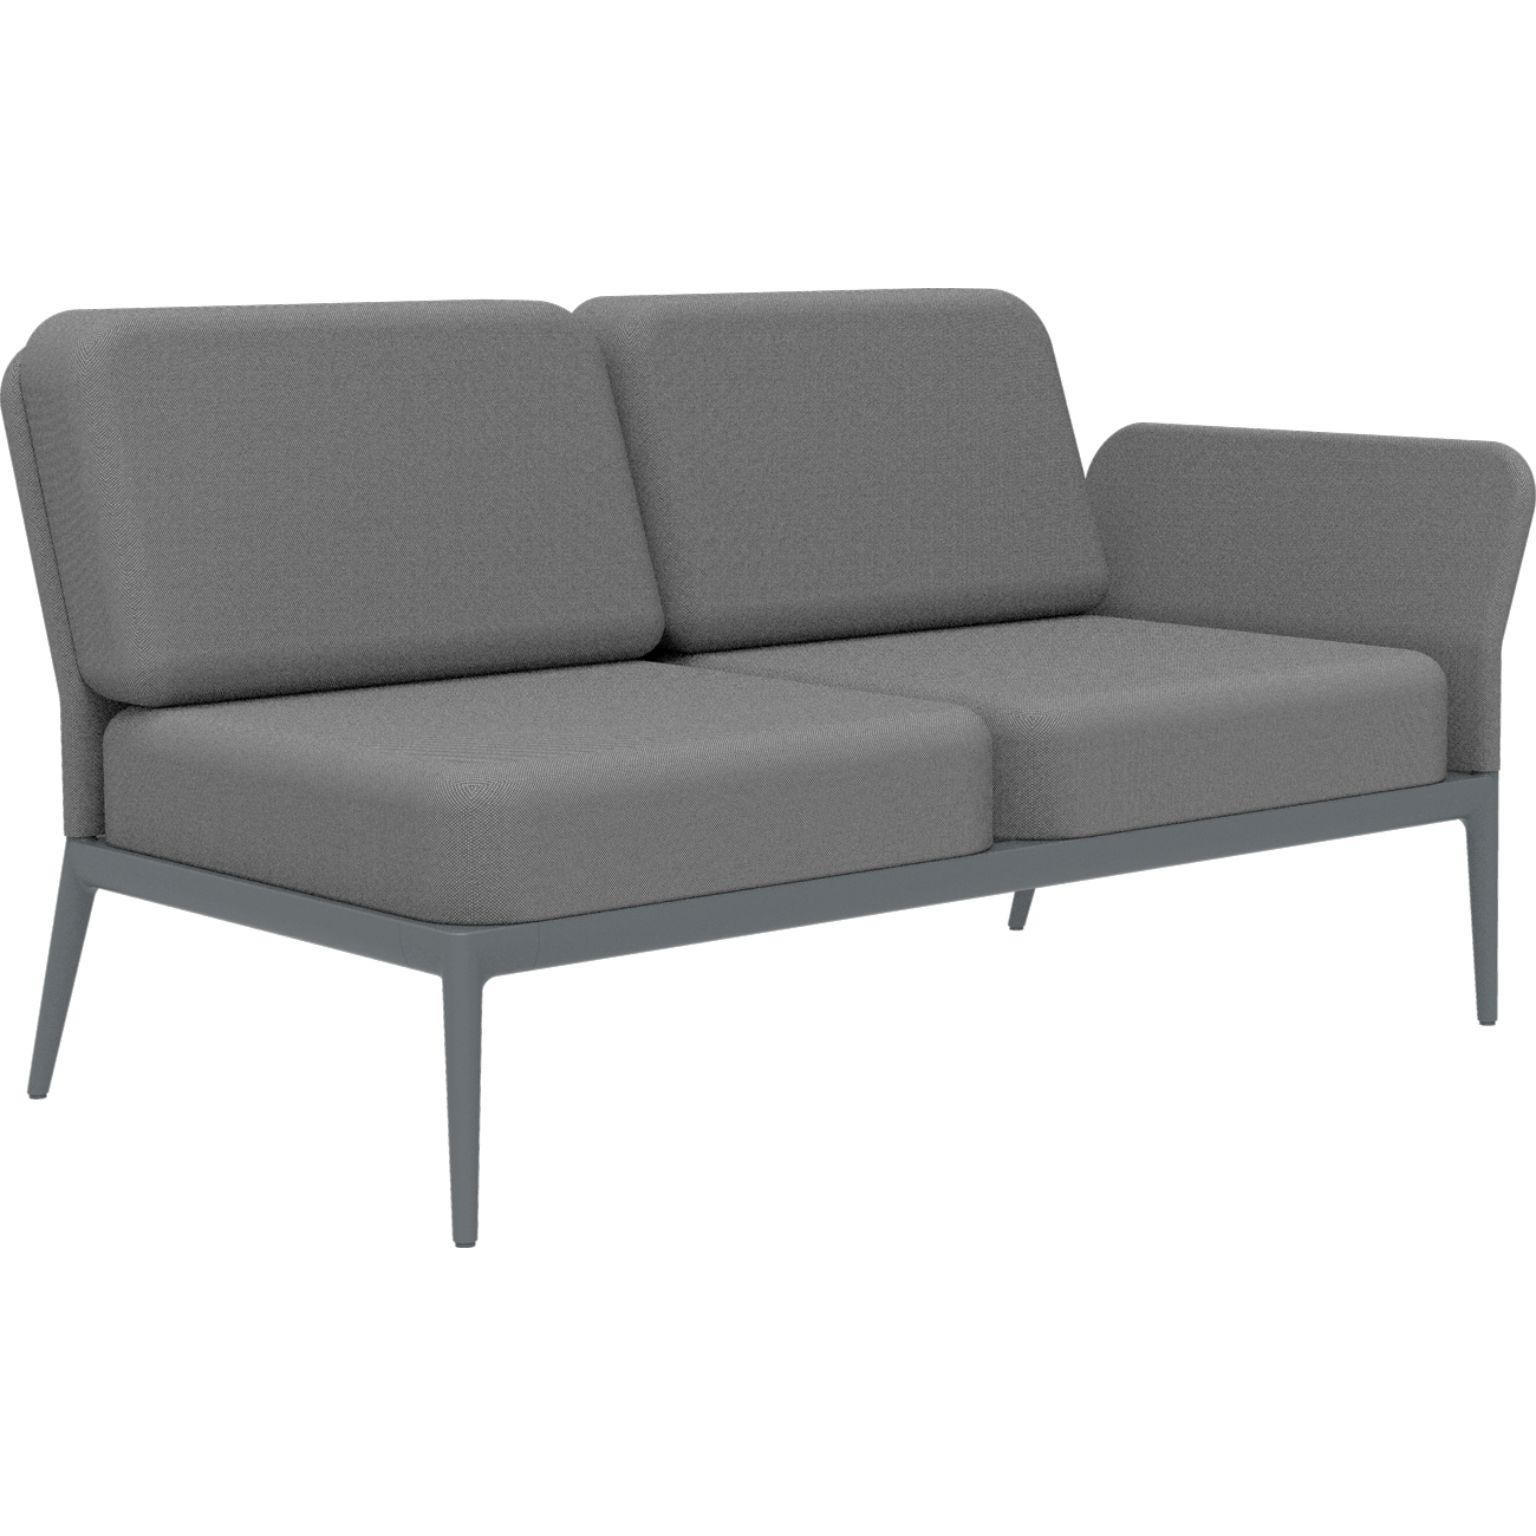 Cover Grey Double Left Modular Sofa by MOWEE
Dimensions: D83 x W148 x H81 cm (seat height 42 cm)
Material: Aluminum and upholstery.
Weight: 29 kg.
Also available in different colors and finishes. Please contact us.

An unmistakable collection